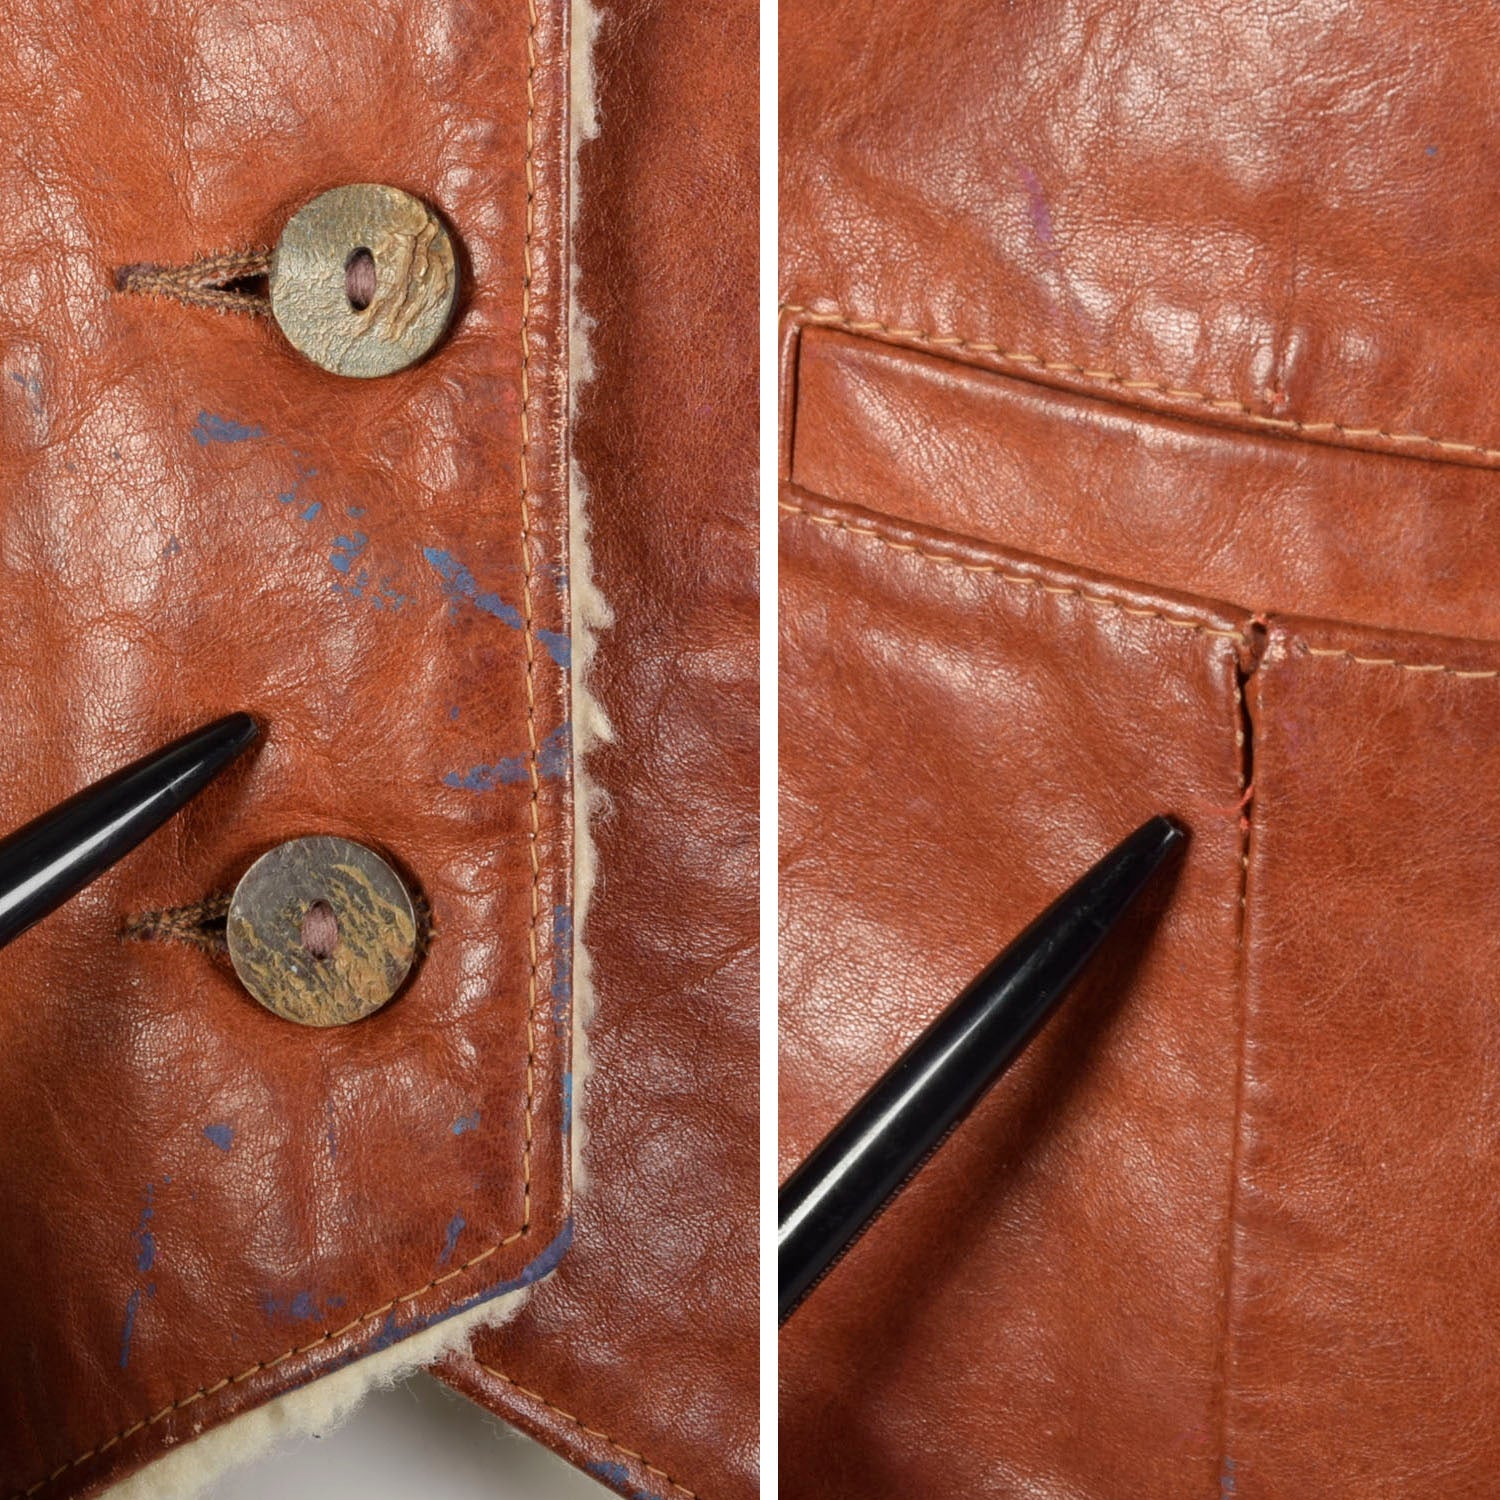 Small 1960s LL Bean Leather Vest Distressed